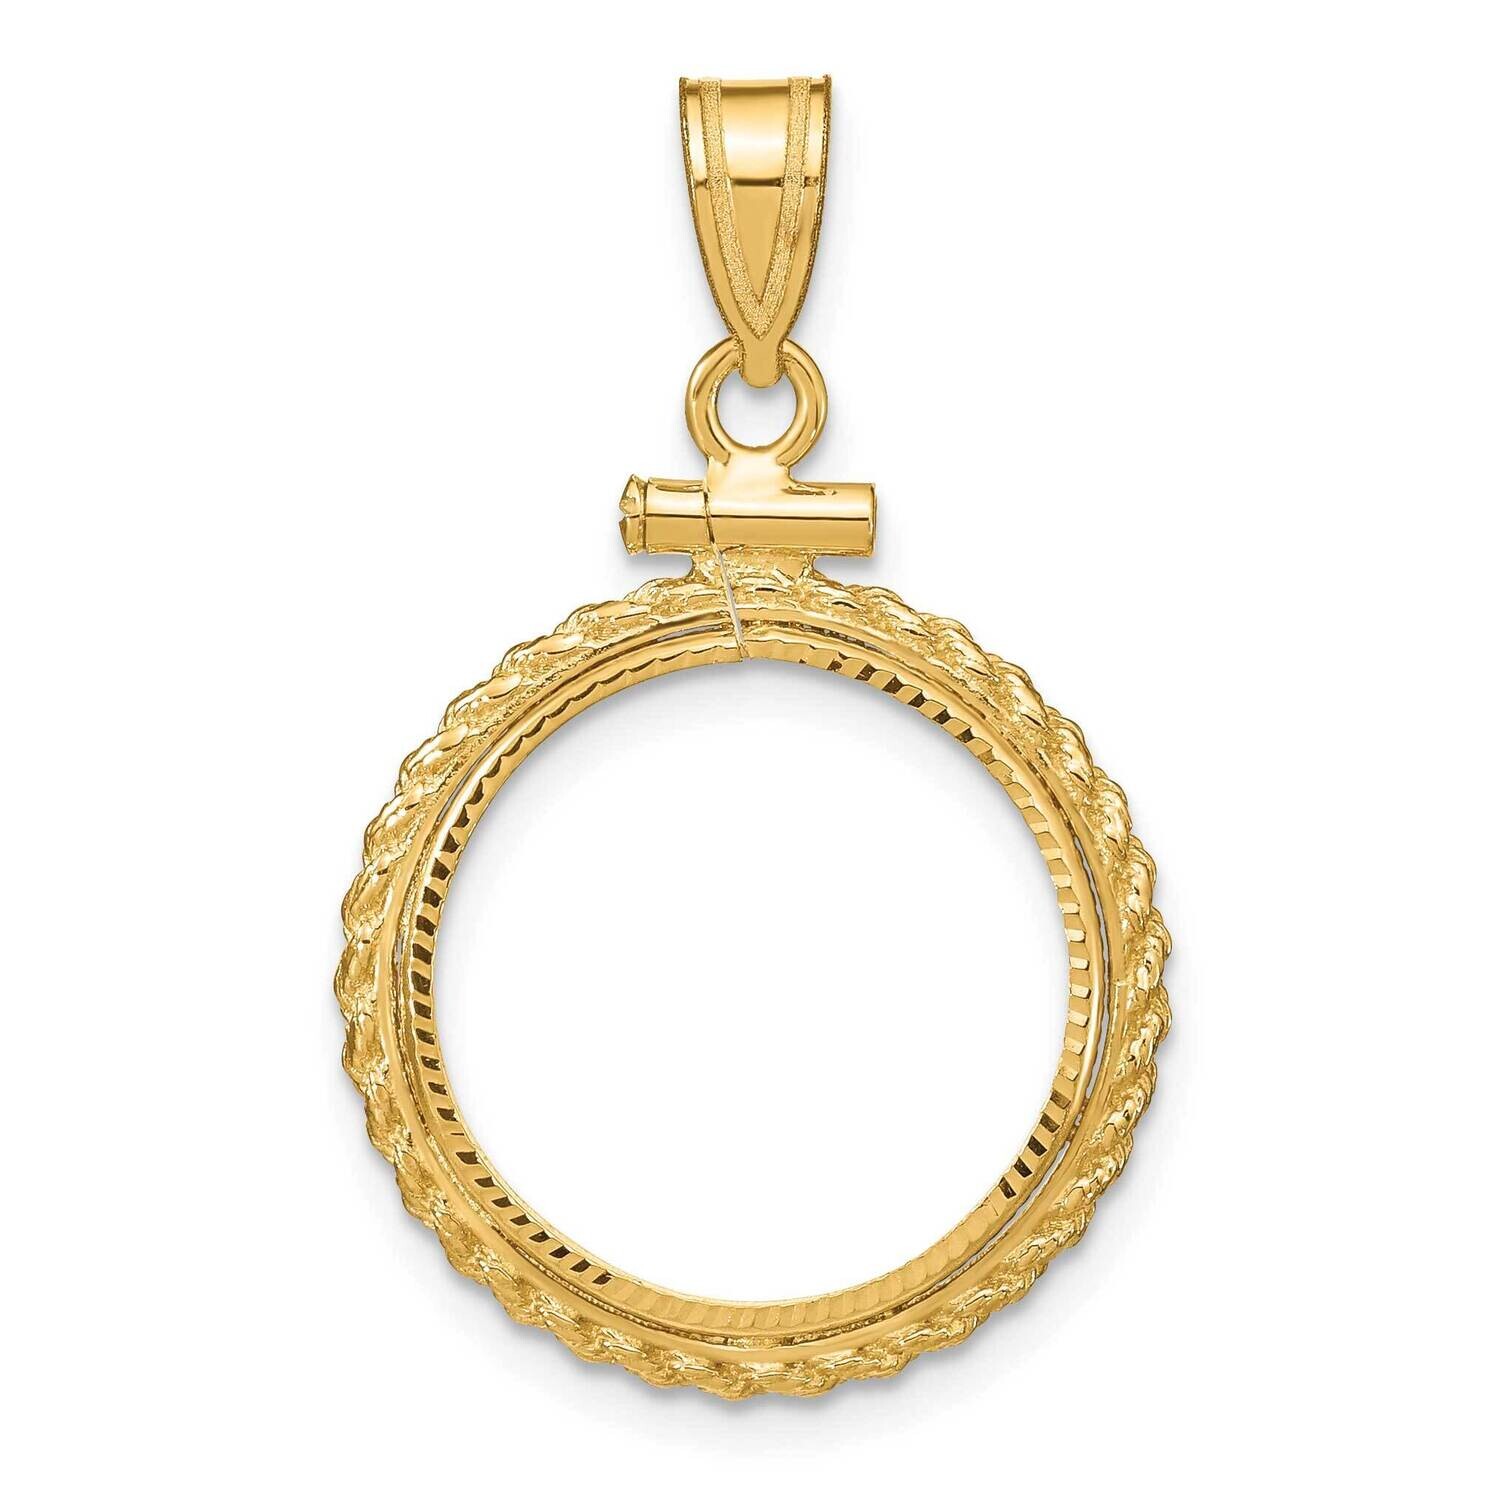 WidebDistinguished Coin Jewelry Diamond-Cut Casted Rope Screw Top 16.5mm X 1.35mm Coin Bezel Pendant 14k Gold C8196/16.5